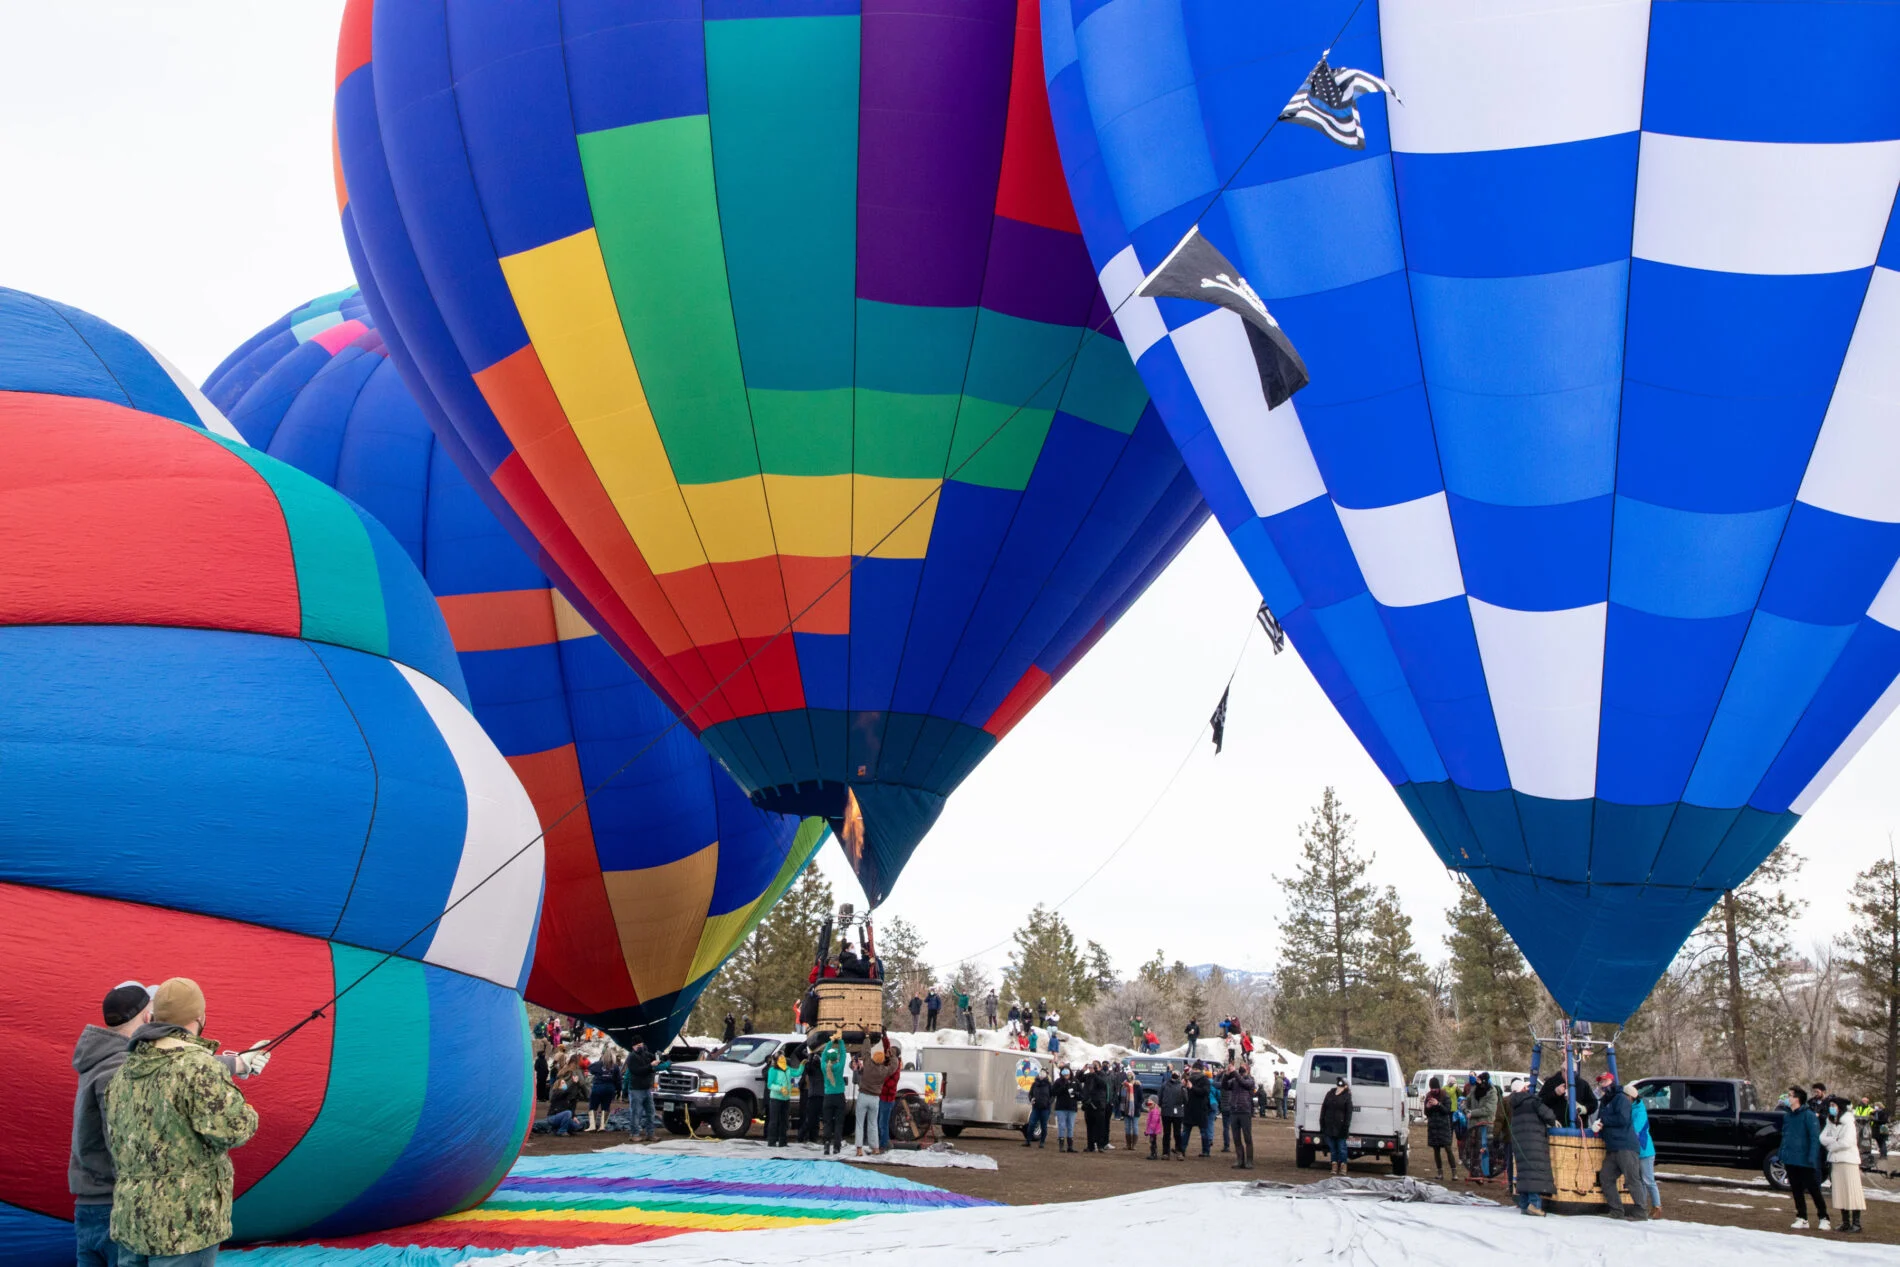 People watch in awe at the winter balloon festival.